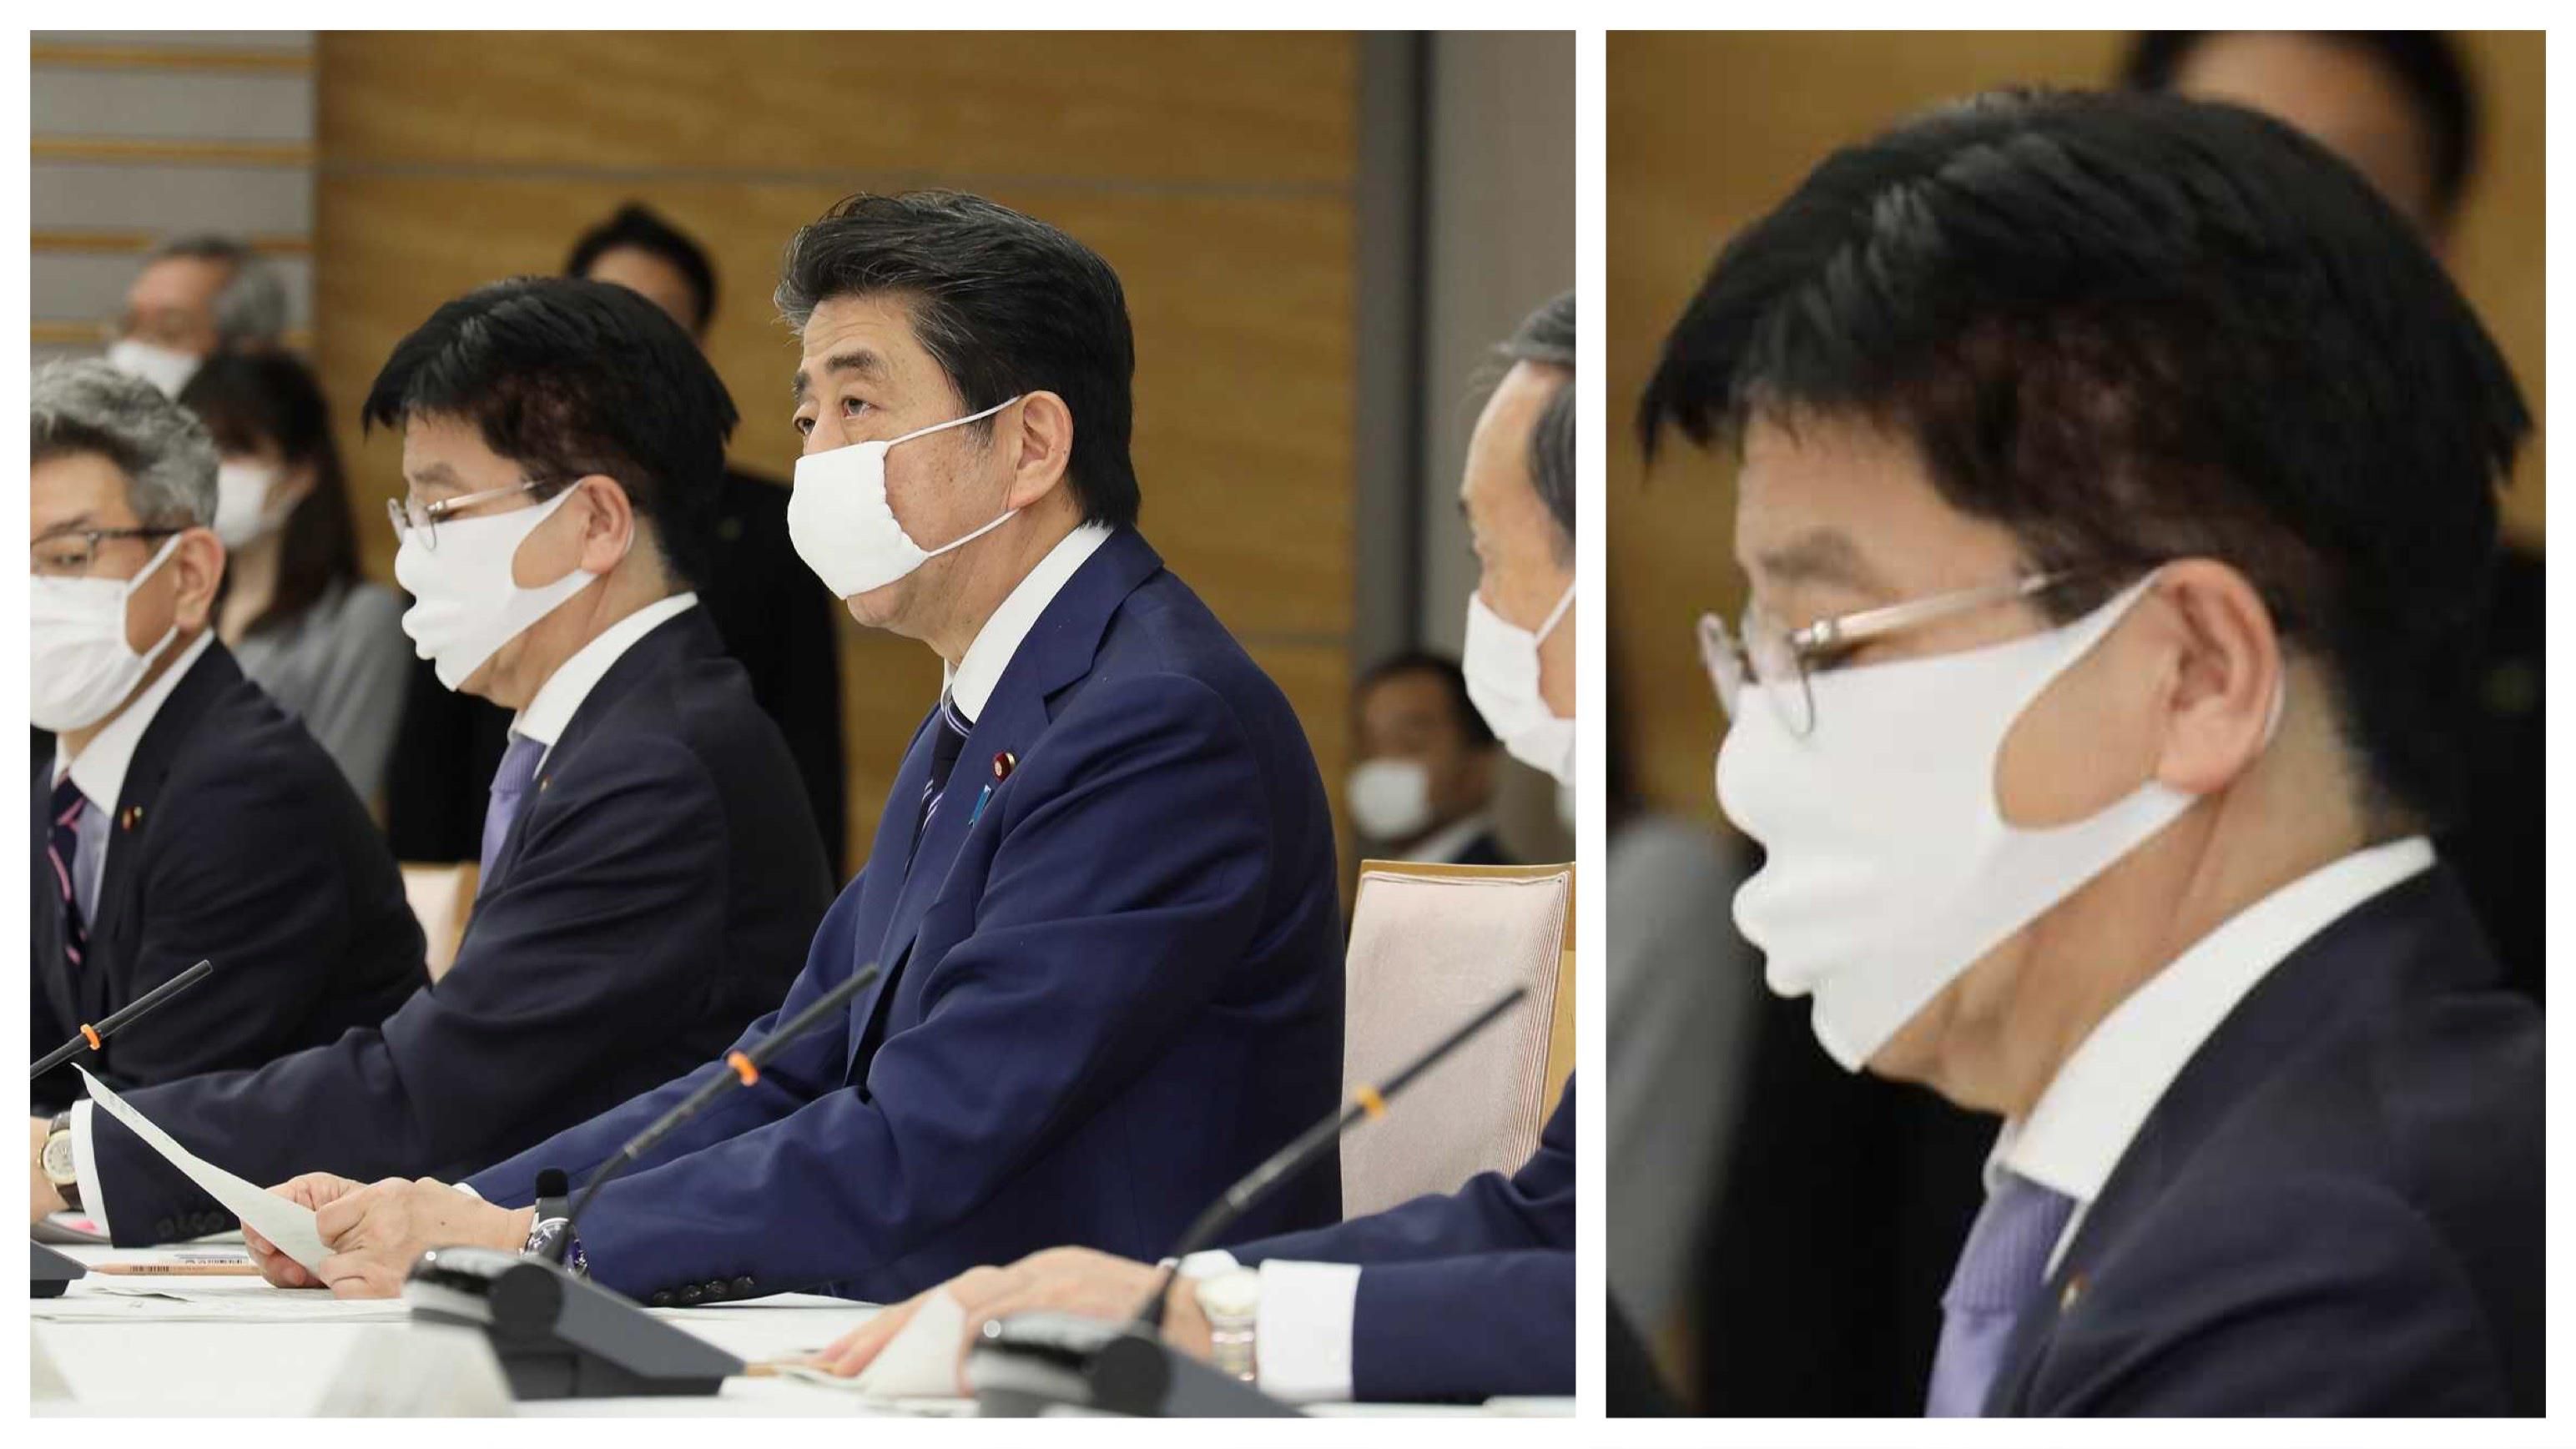 Japanese media keep focusing on PM Abe’s small mask, yet there’s this guy beside him.